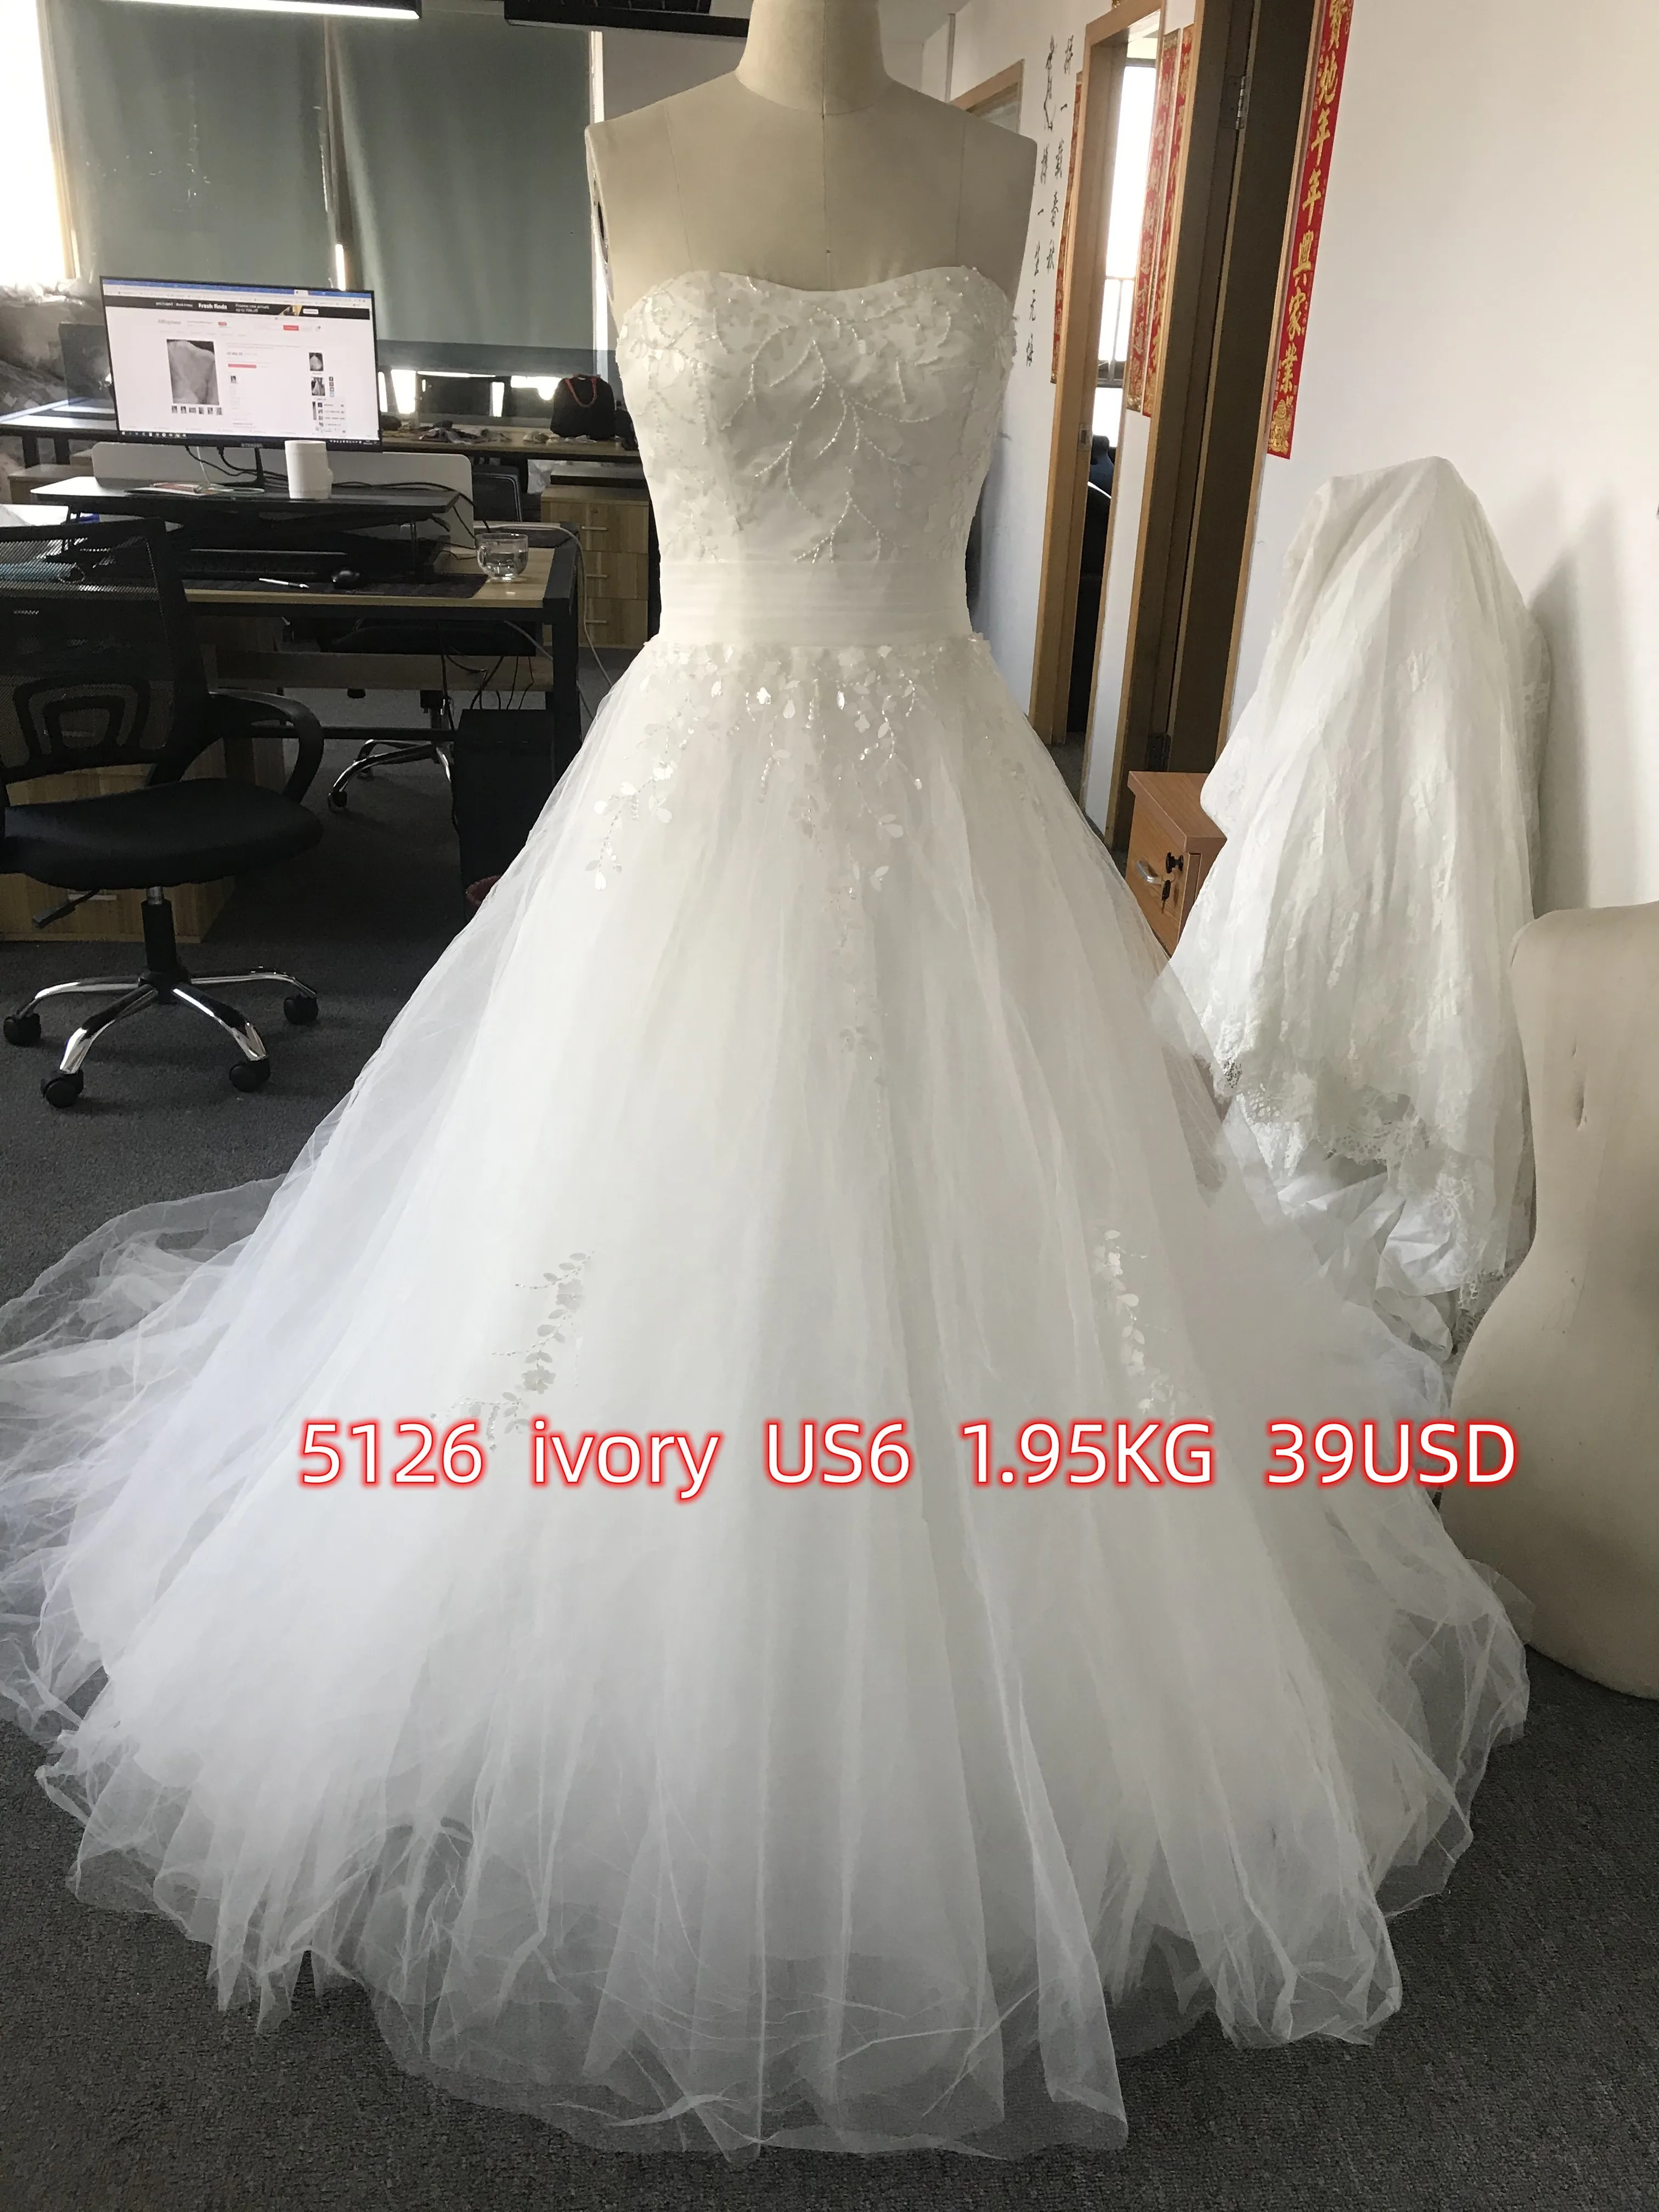 

CloverBridal Cheap New Tube Beads Sequins Wedding Dresses For Women Ready-To-Ship Discount Tulle Strapless Robe De Mariée 5126